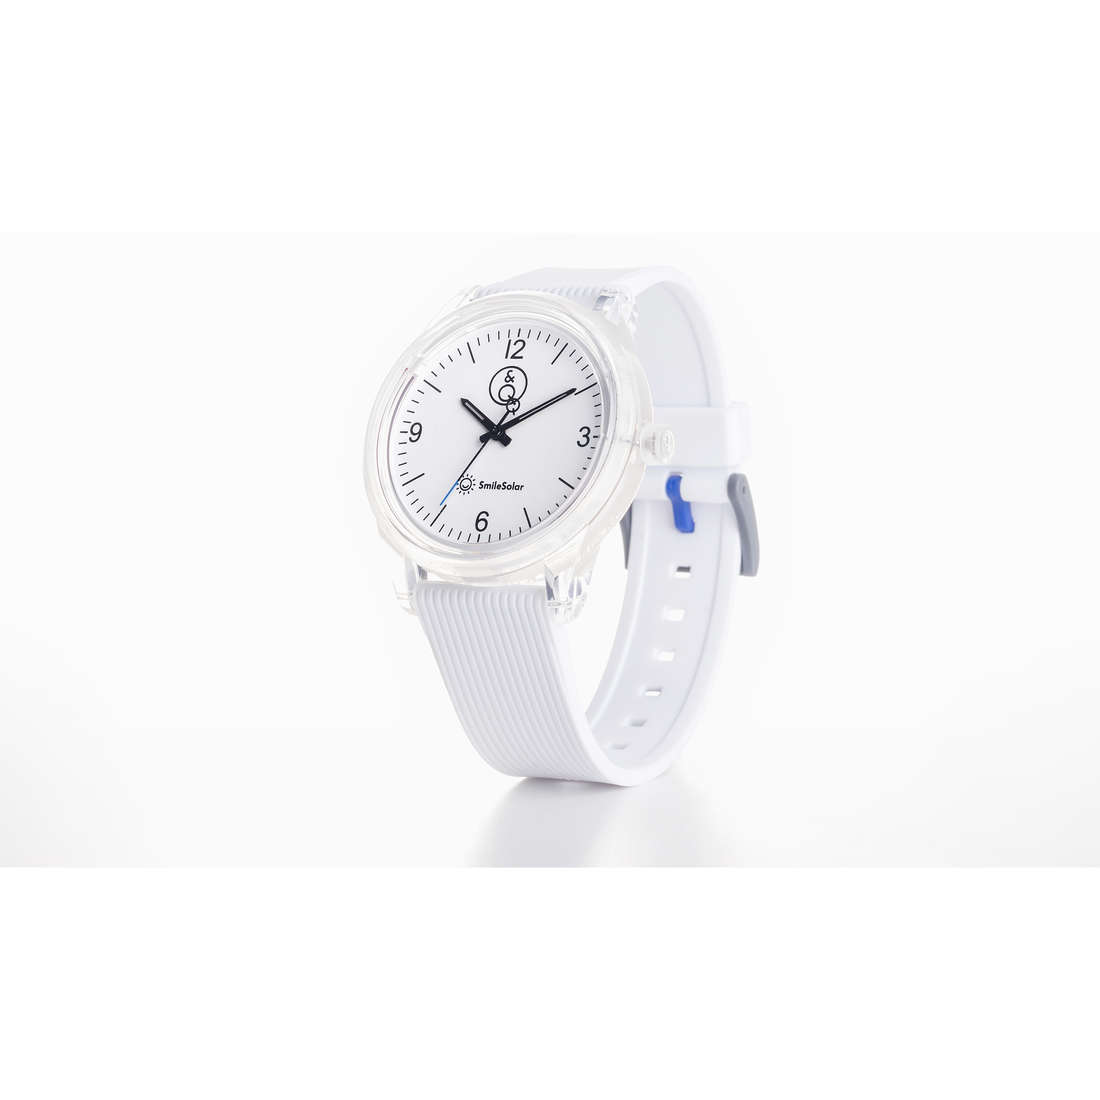 Smile Solar Regular Women’s Time-Only Watch